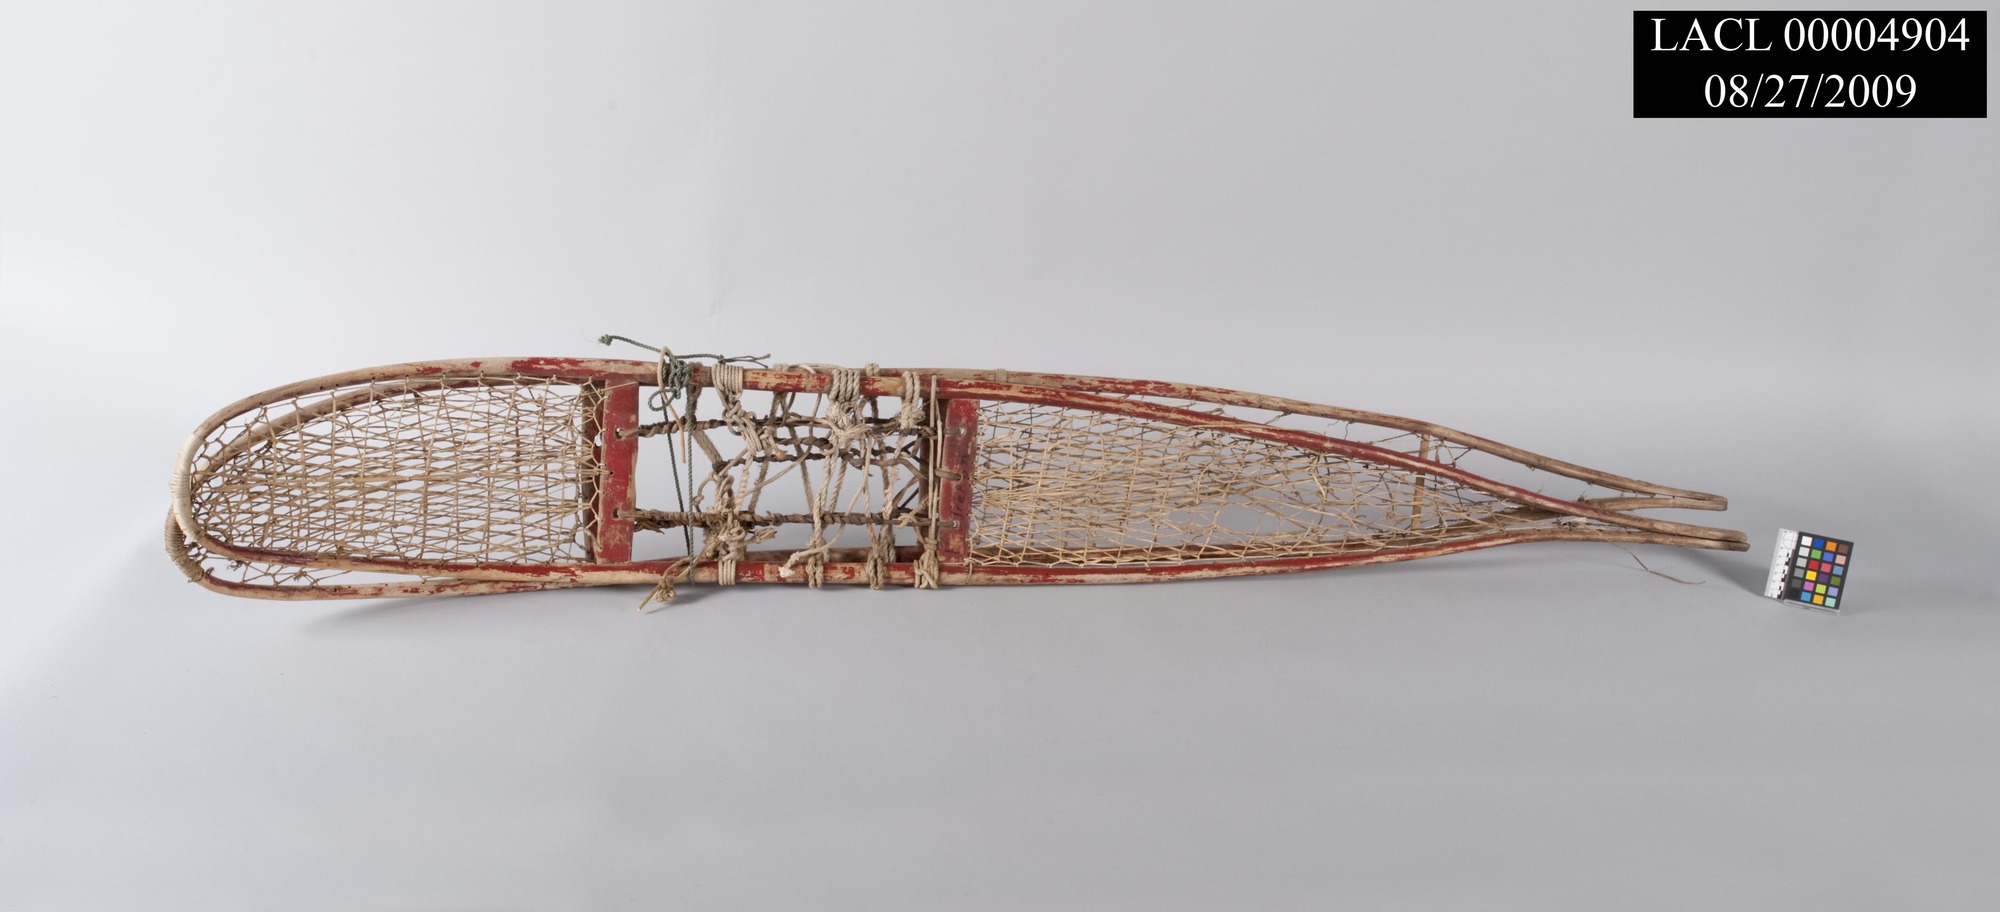 Image of snowshoes with birch frames.